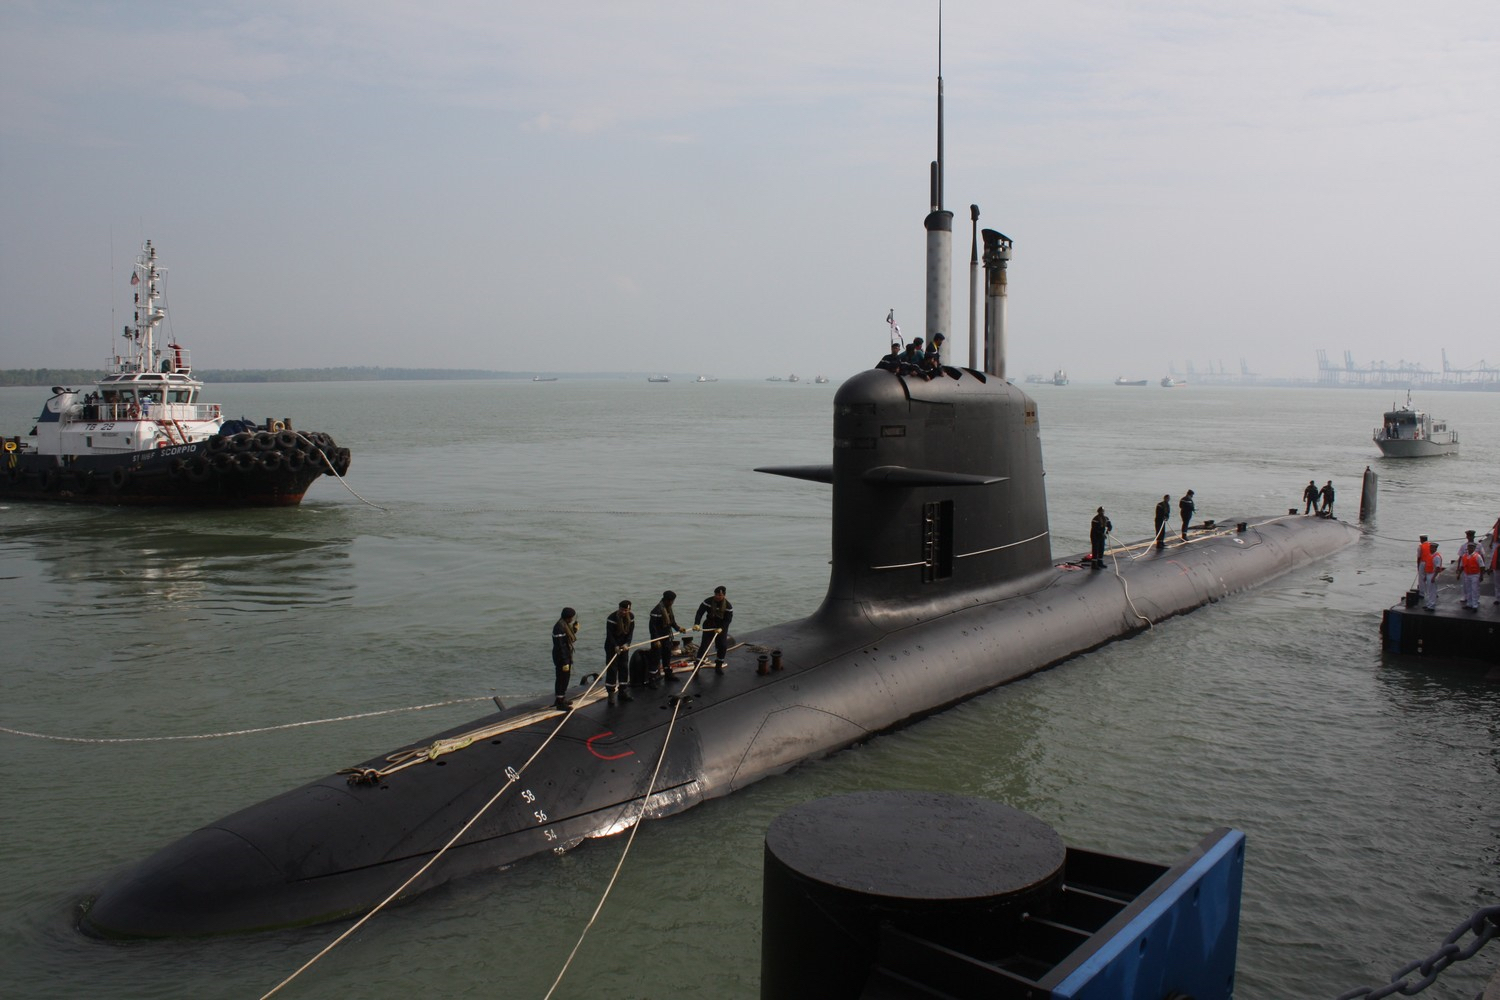 KD Tunku Abdul Rahman in the Royal Malaysian Navy base at Port Klang following delivery from France in September 2009. It is the first of two Scorpene submarines built jointly by French shipbuilder Naval Group and Spanish shipbuilder Navantia. (Wikicommons)